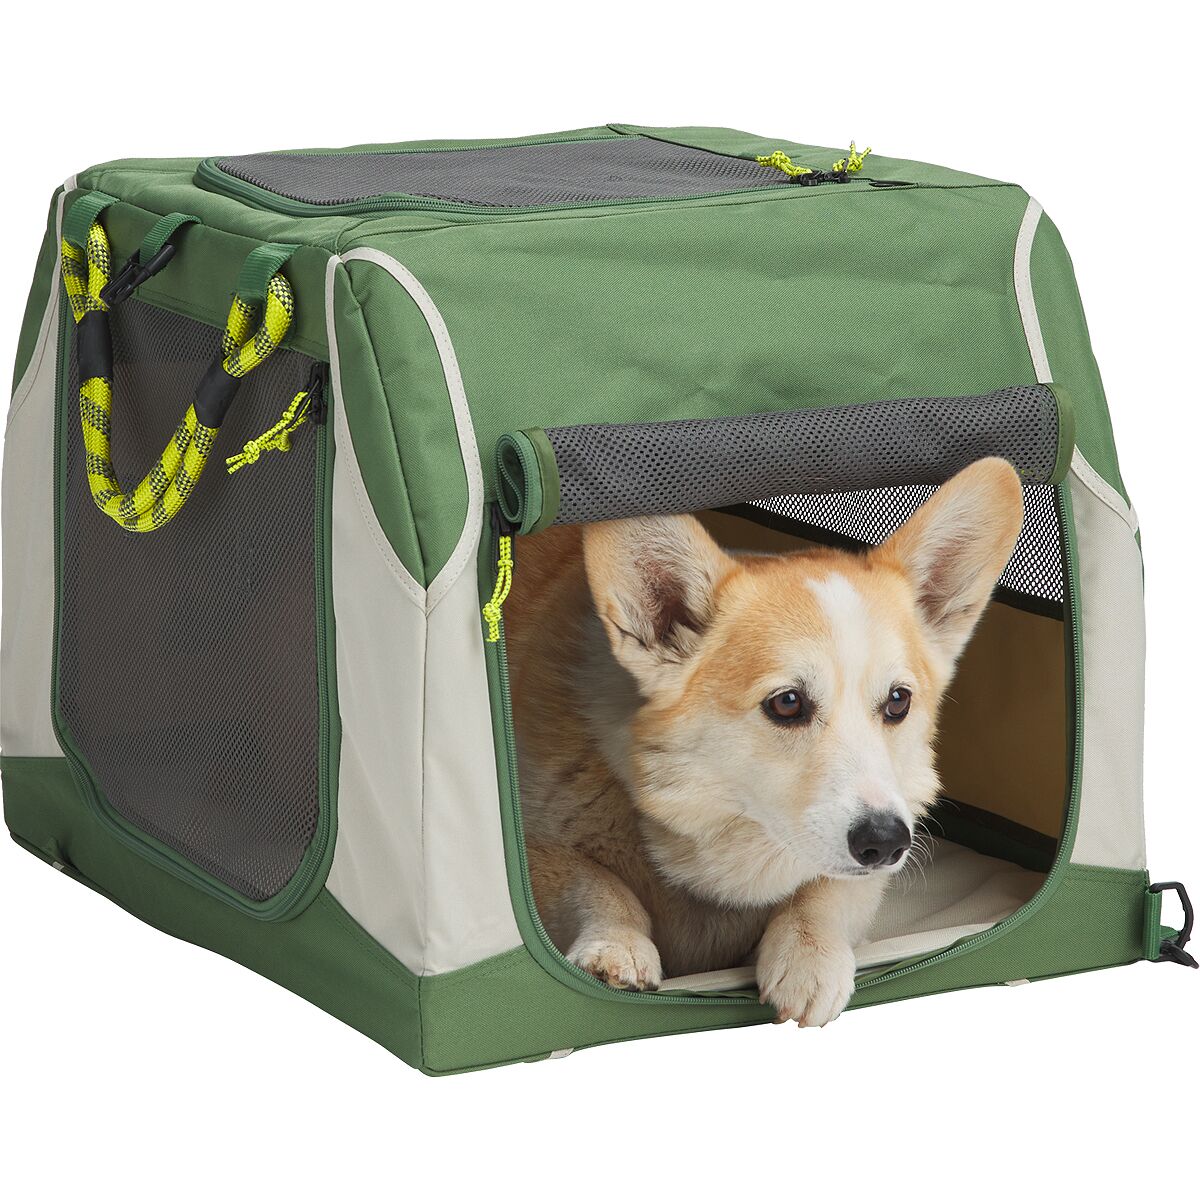 Backcountry x Petco The Foldable Dog Travel Crate - Hike & Camp